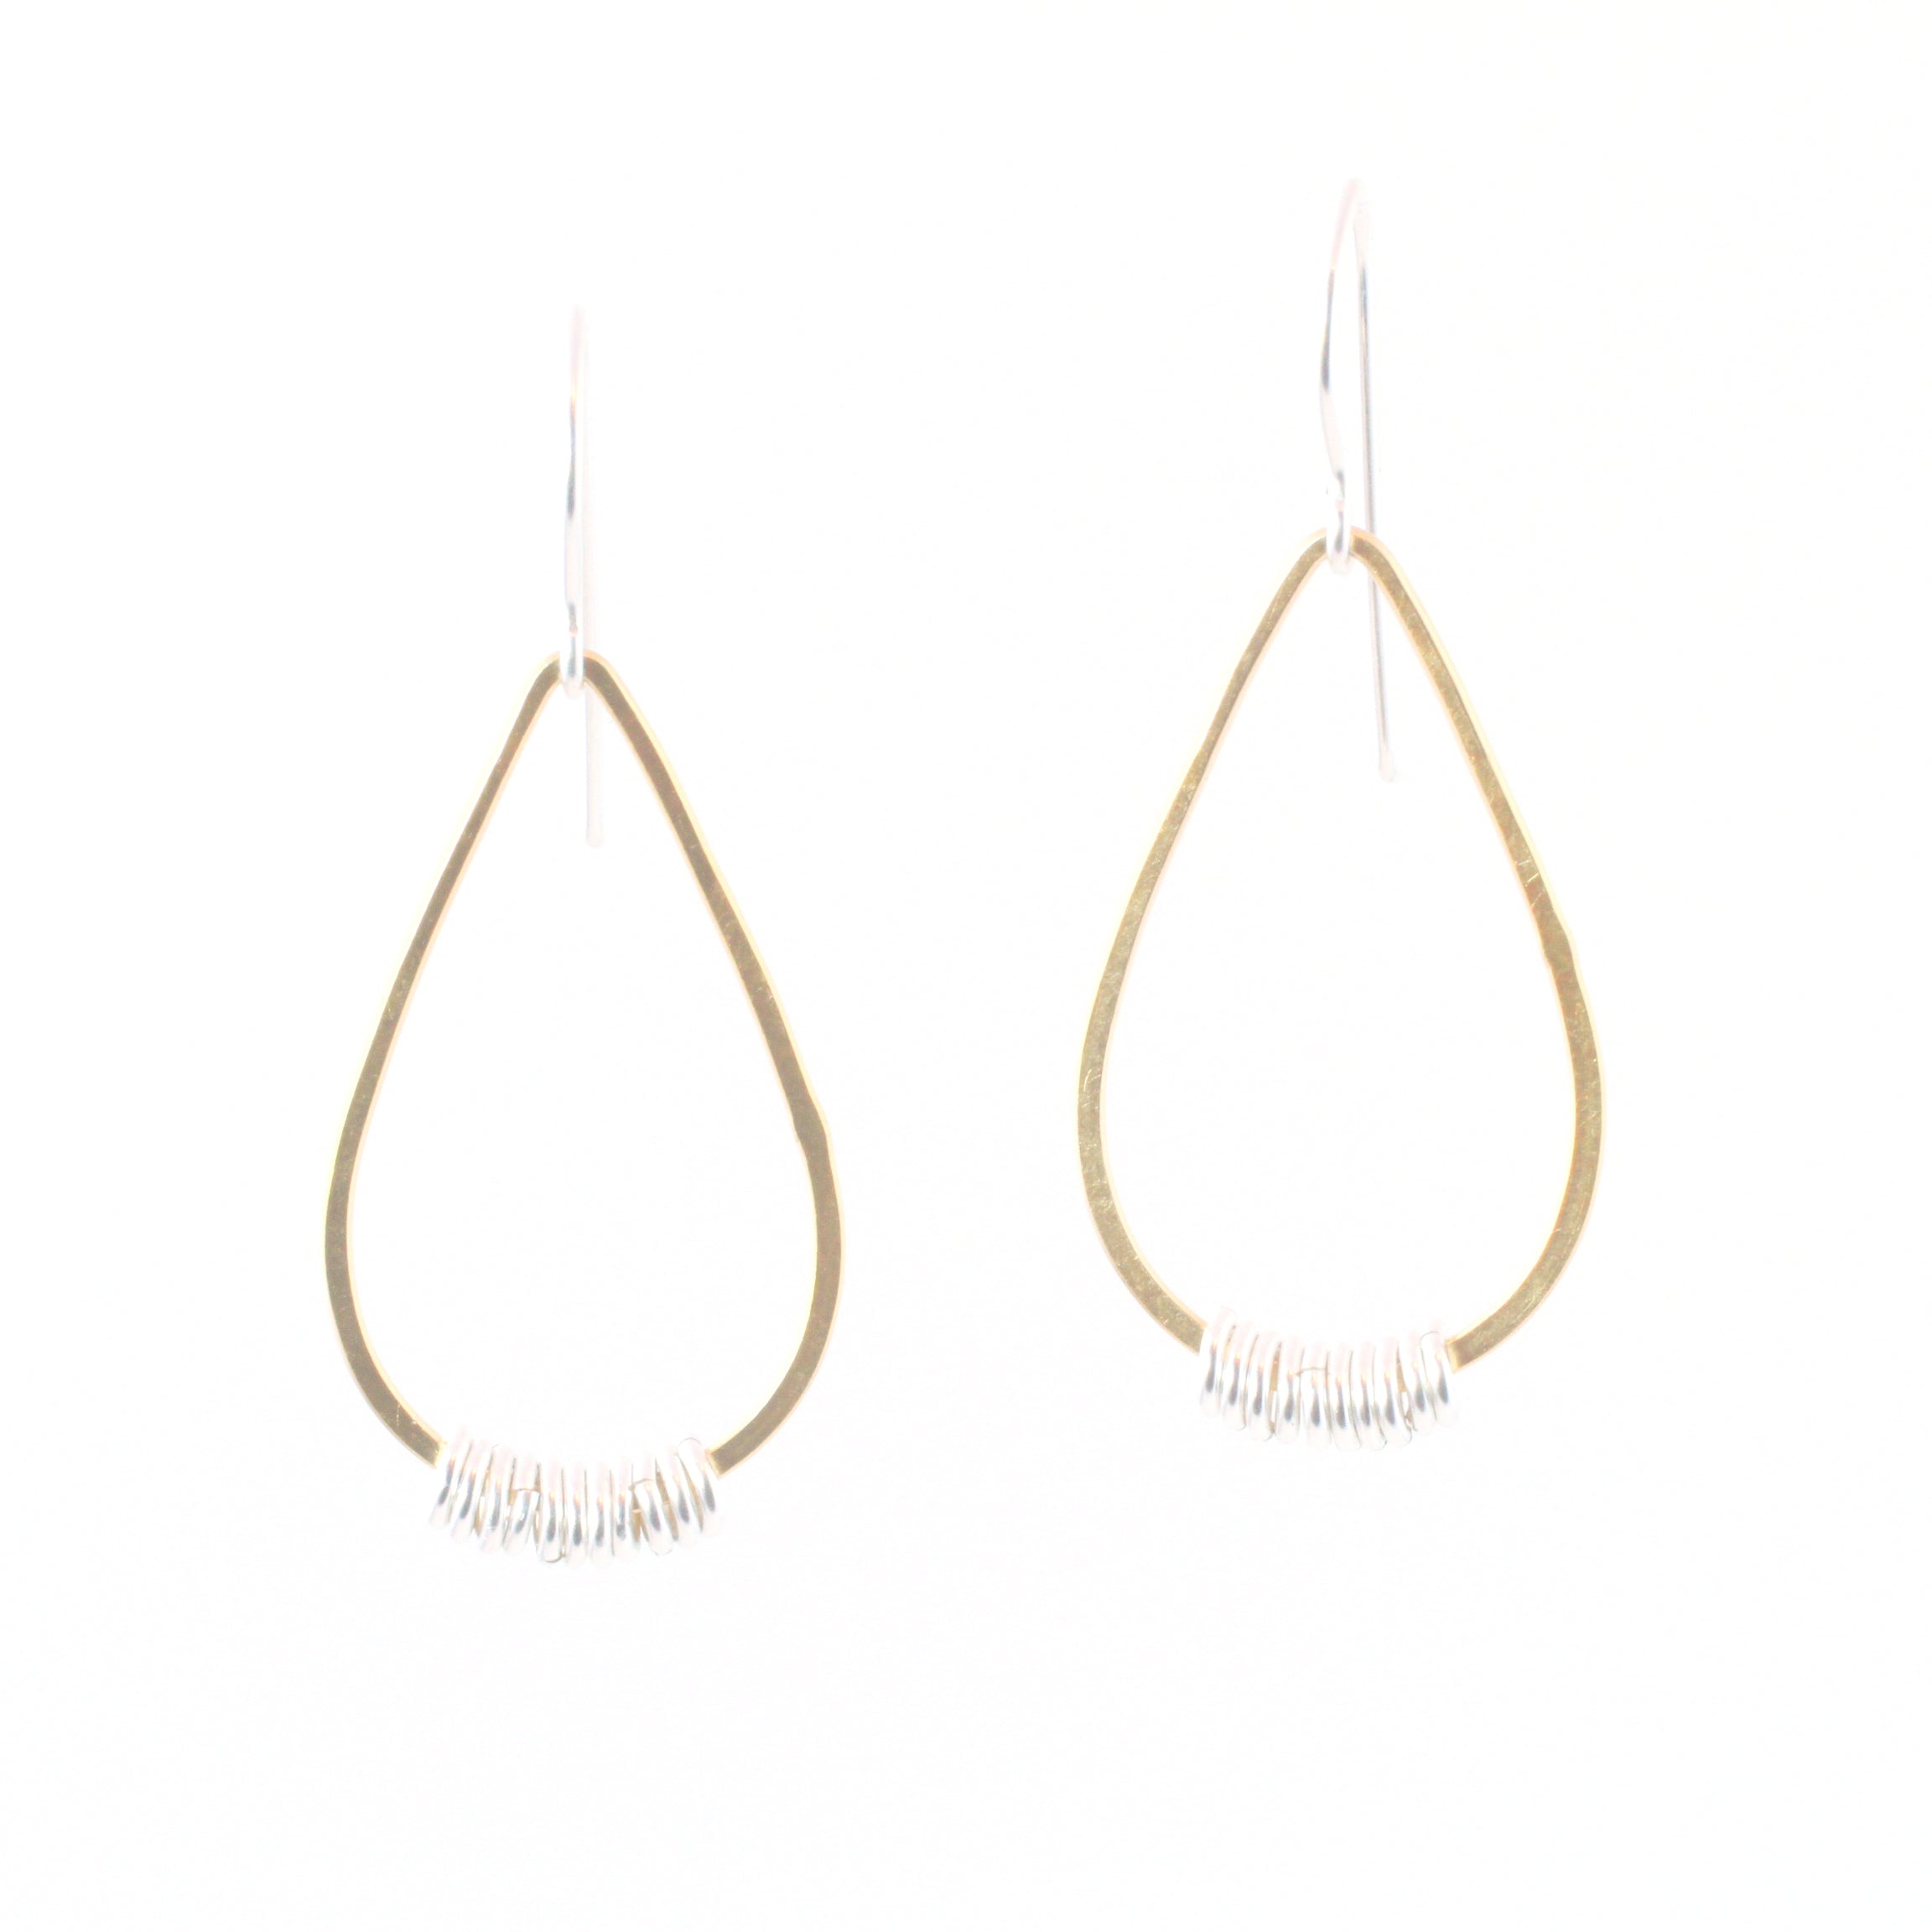 Suspended Earrings (Gold-Filled)